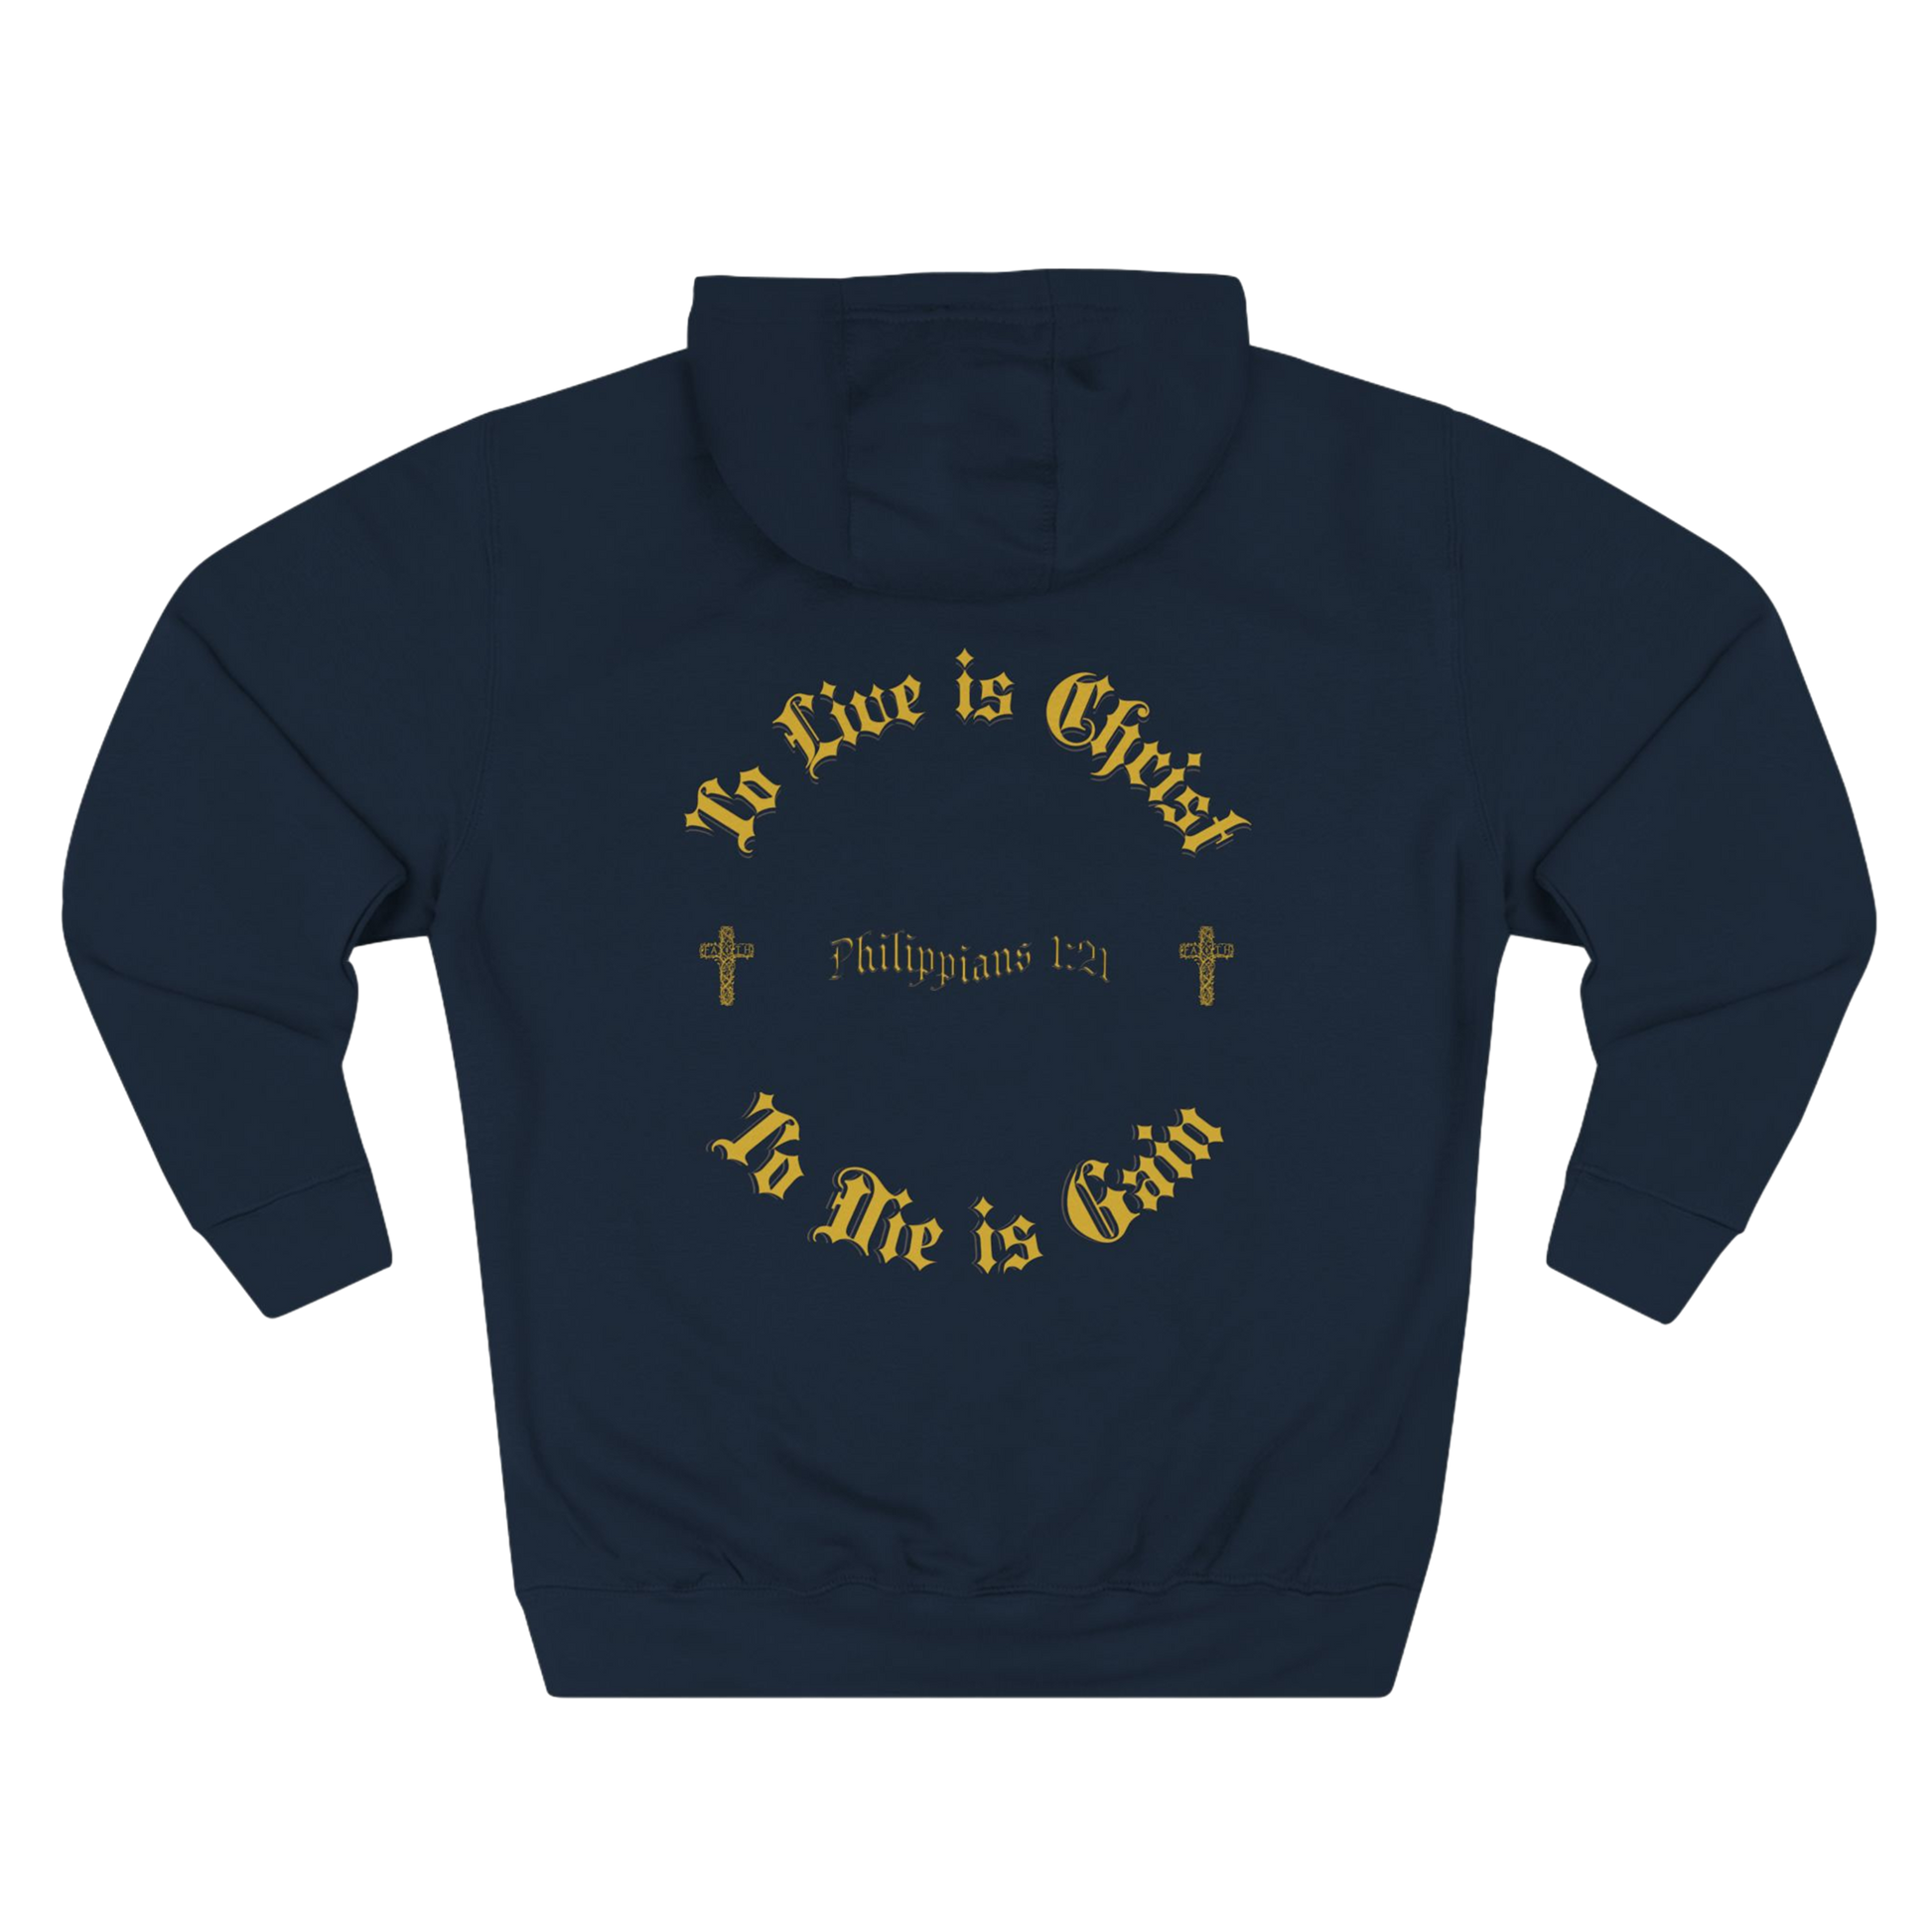 BoundlessFaith - To Live is Christ, To Die is Gain - Christian Apparel Hoodie BLUE - TRUE Apparel of God